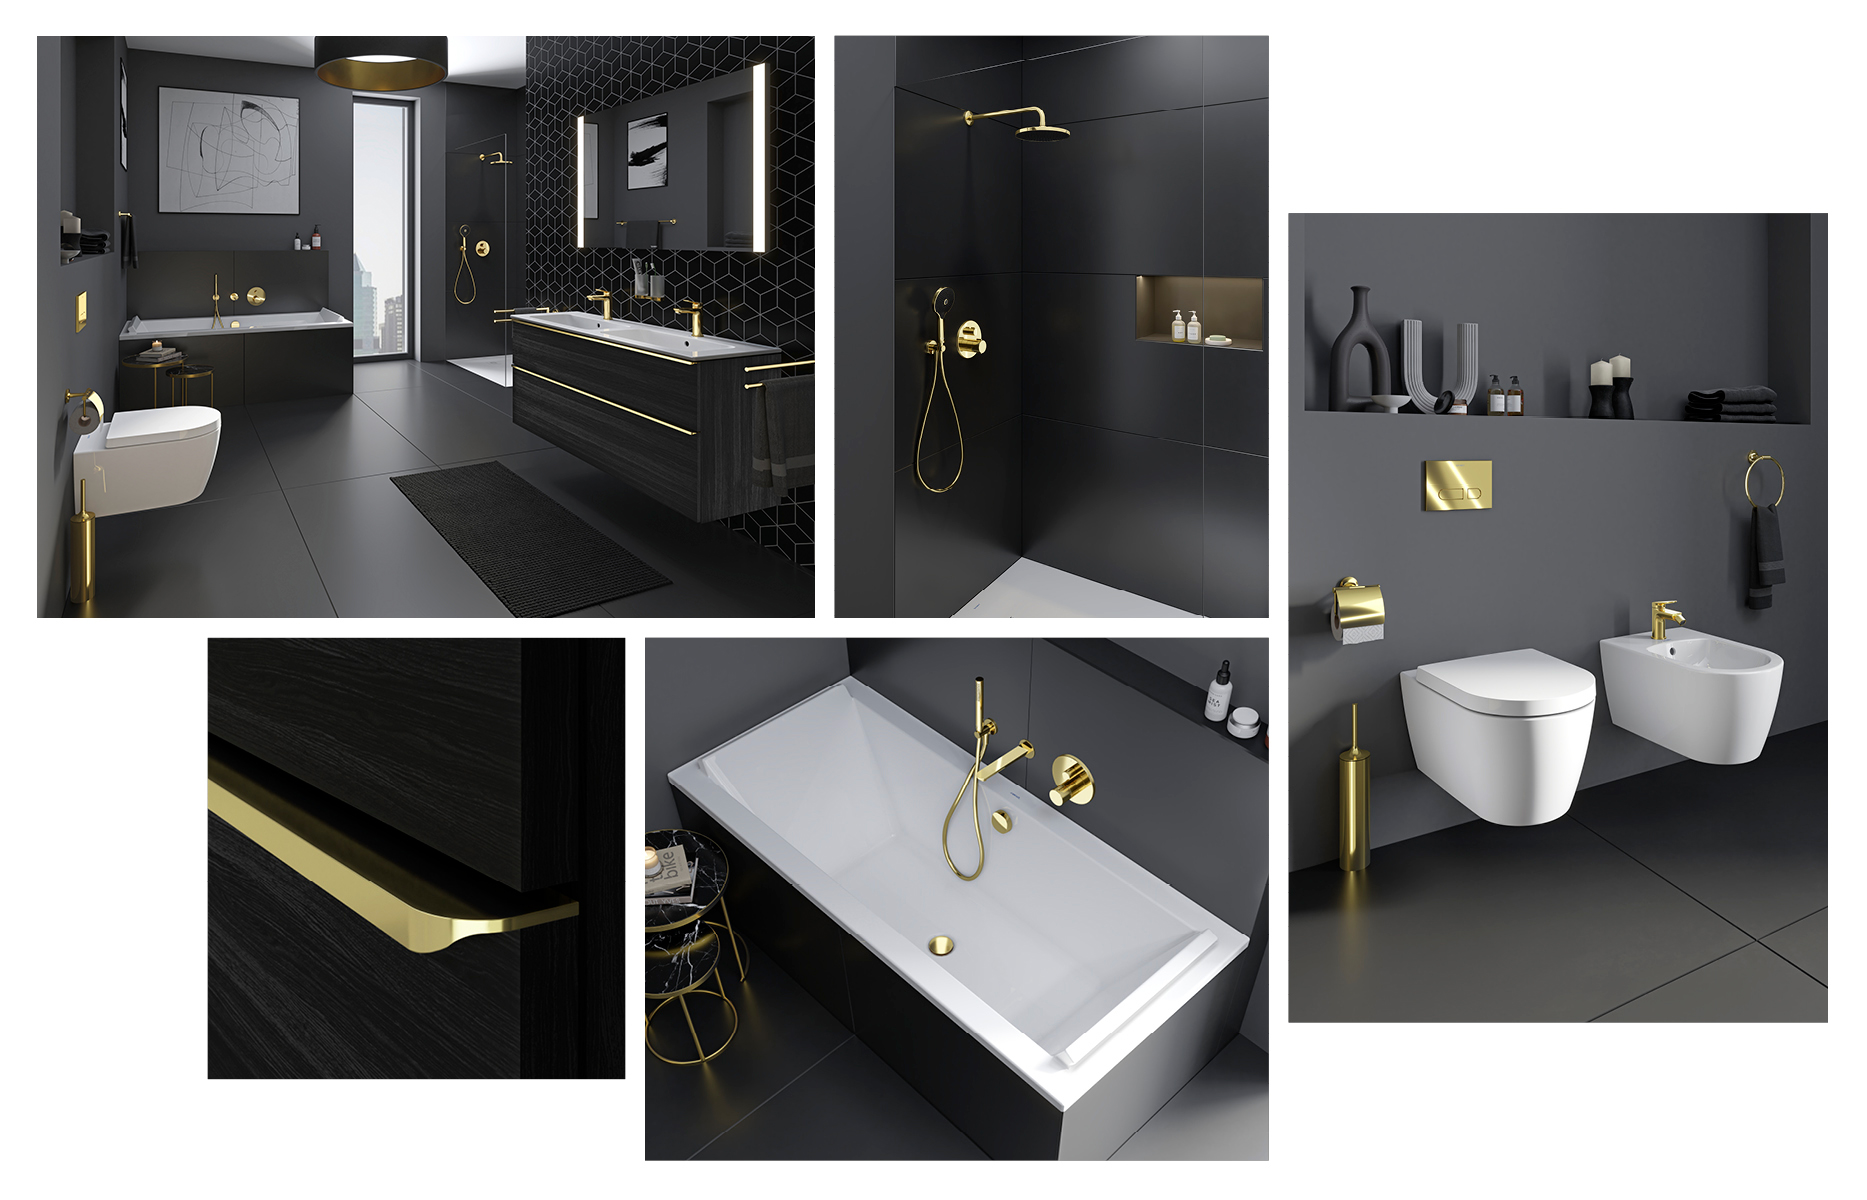 Duravit bathroom furniture with faucet and accessories in polished gold
